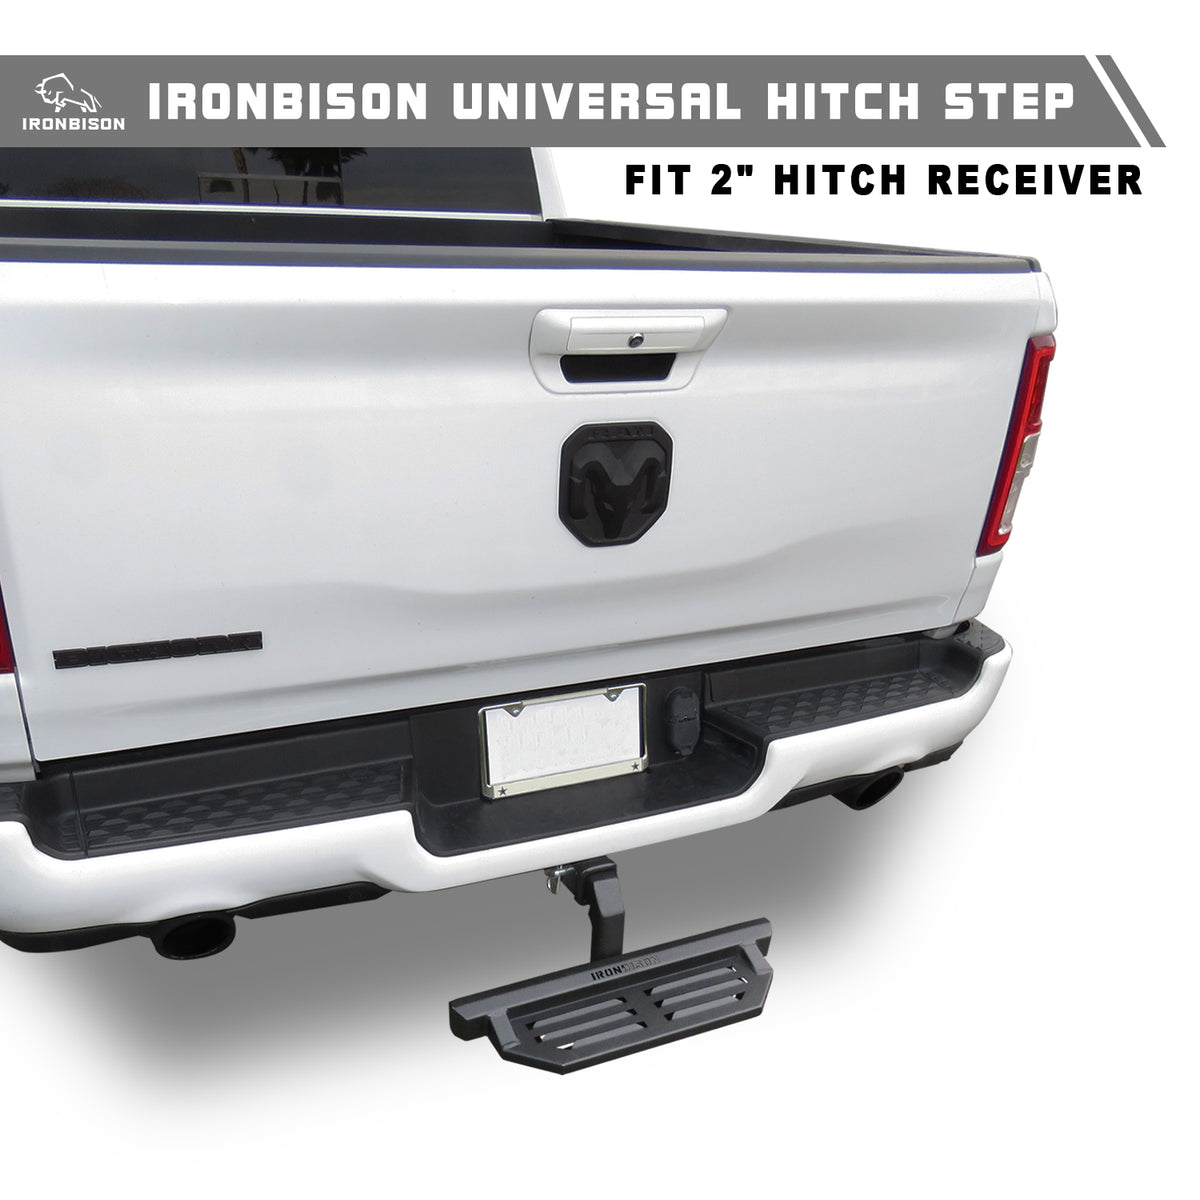 IRONBISON Hitch Step Universal Fit 2 Hitch Receivers with 5 Drop Ste